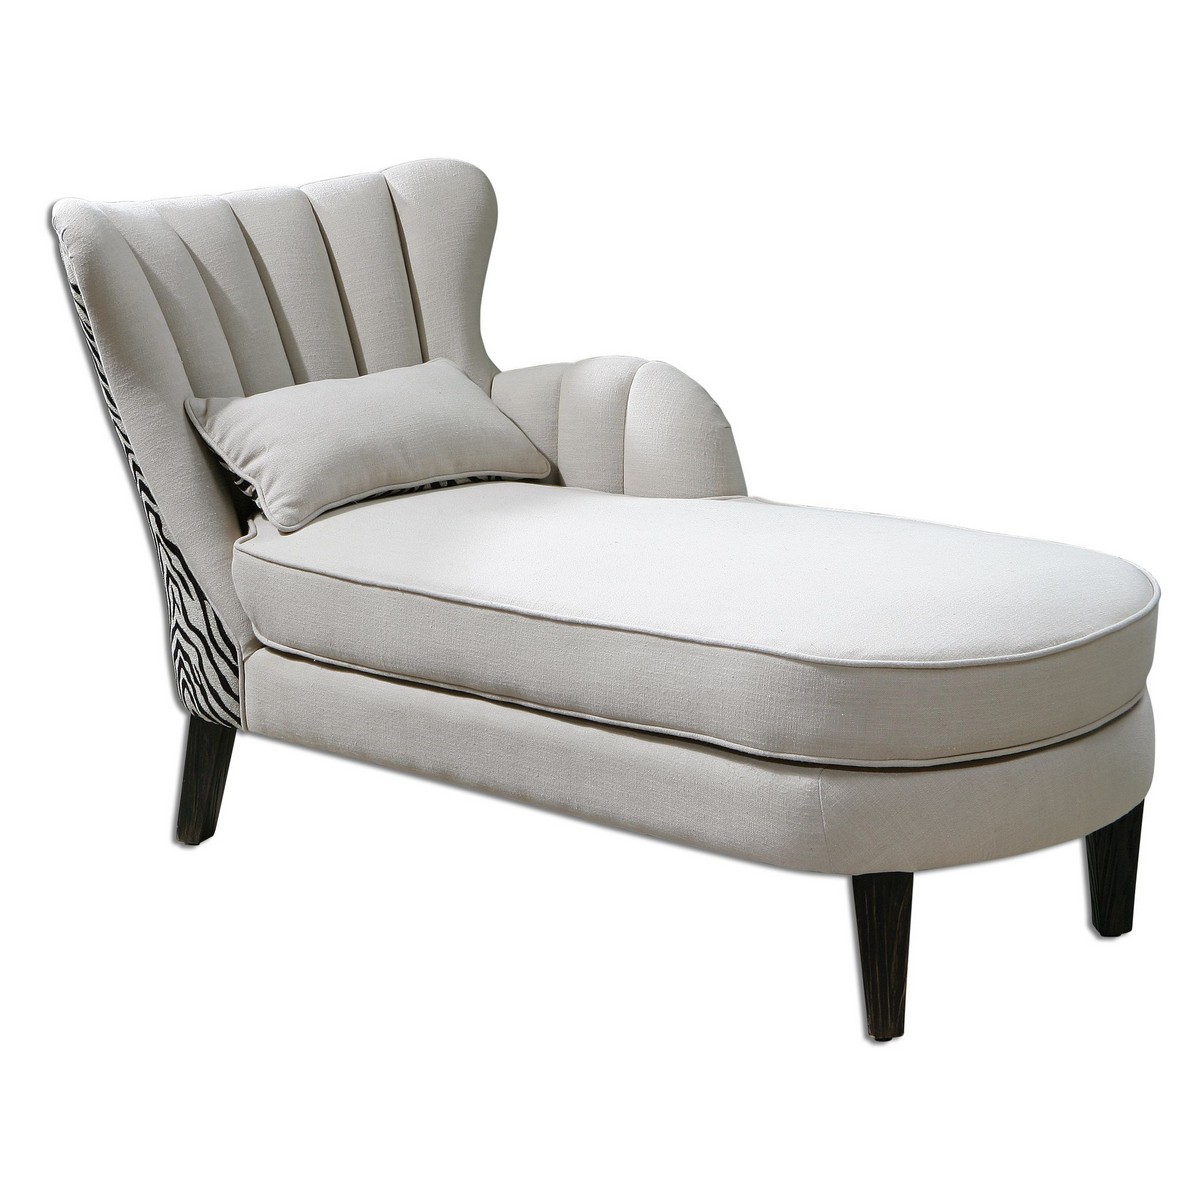 Uttermost Zea Chaise Lounge